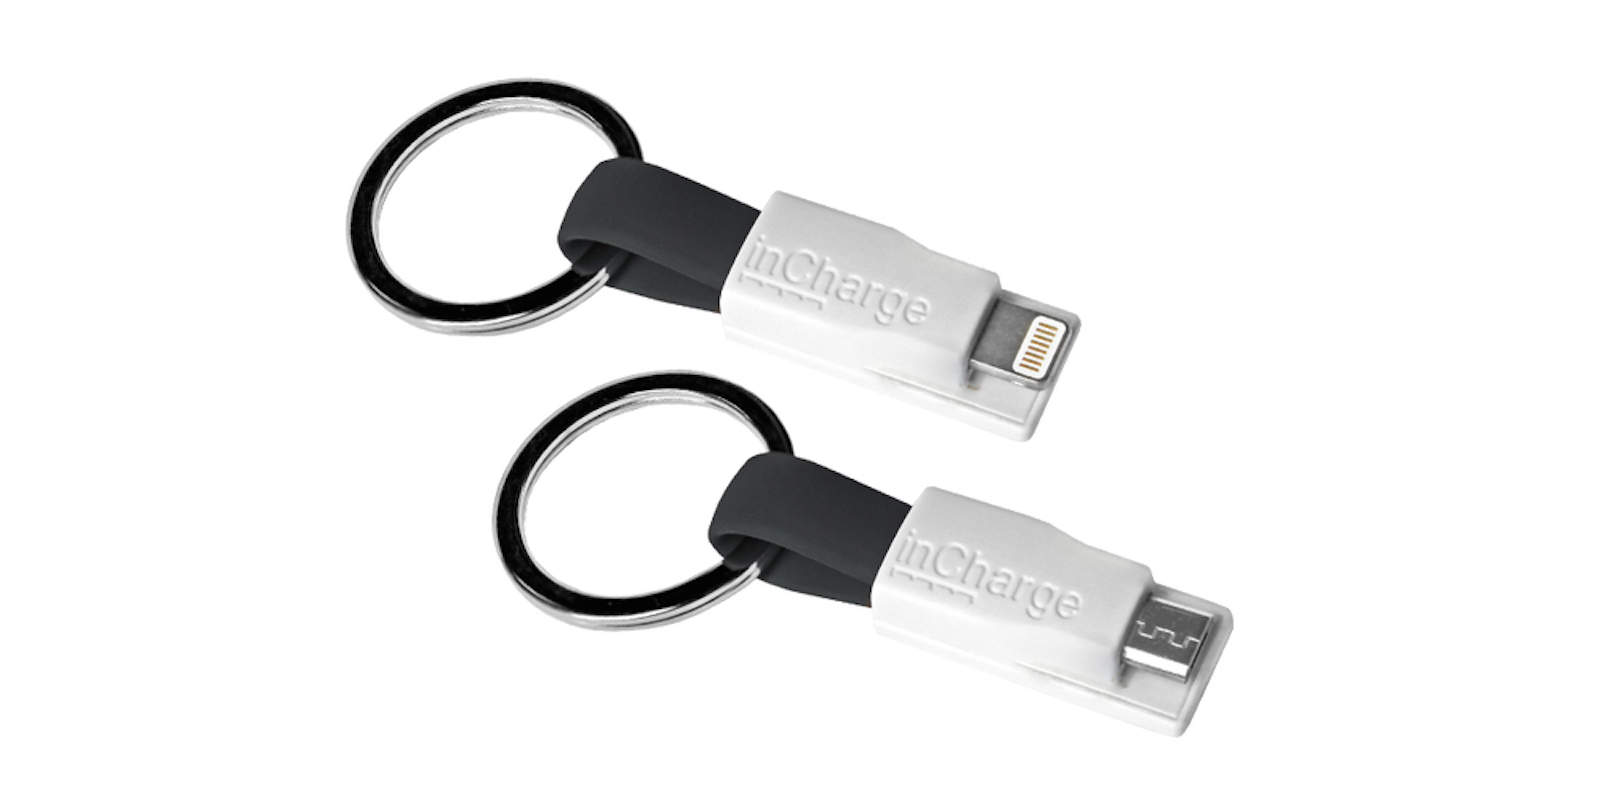 inCharge is the most portable, compact charging cable you're going to find.